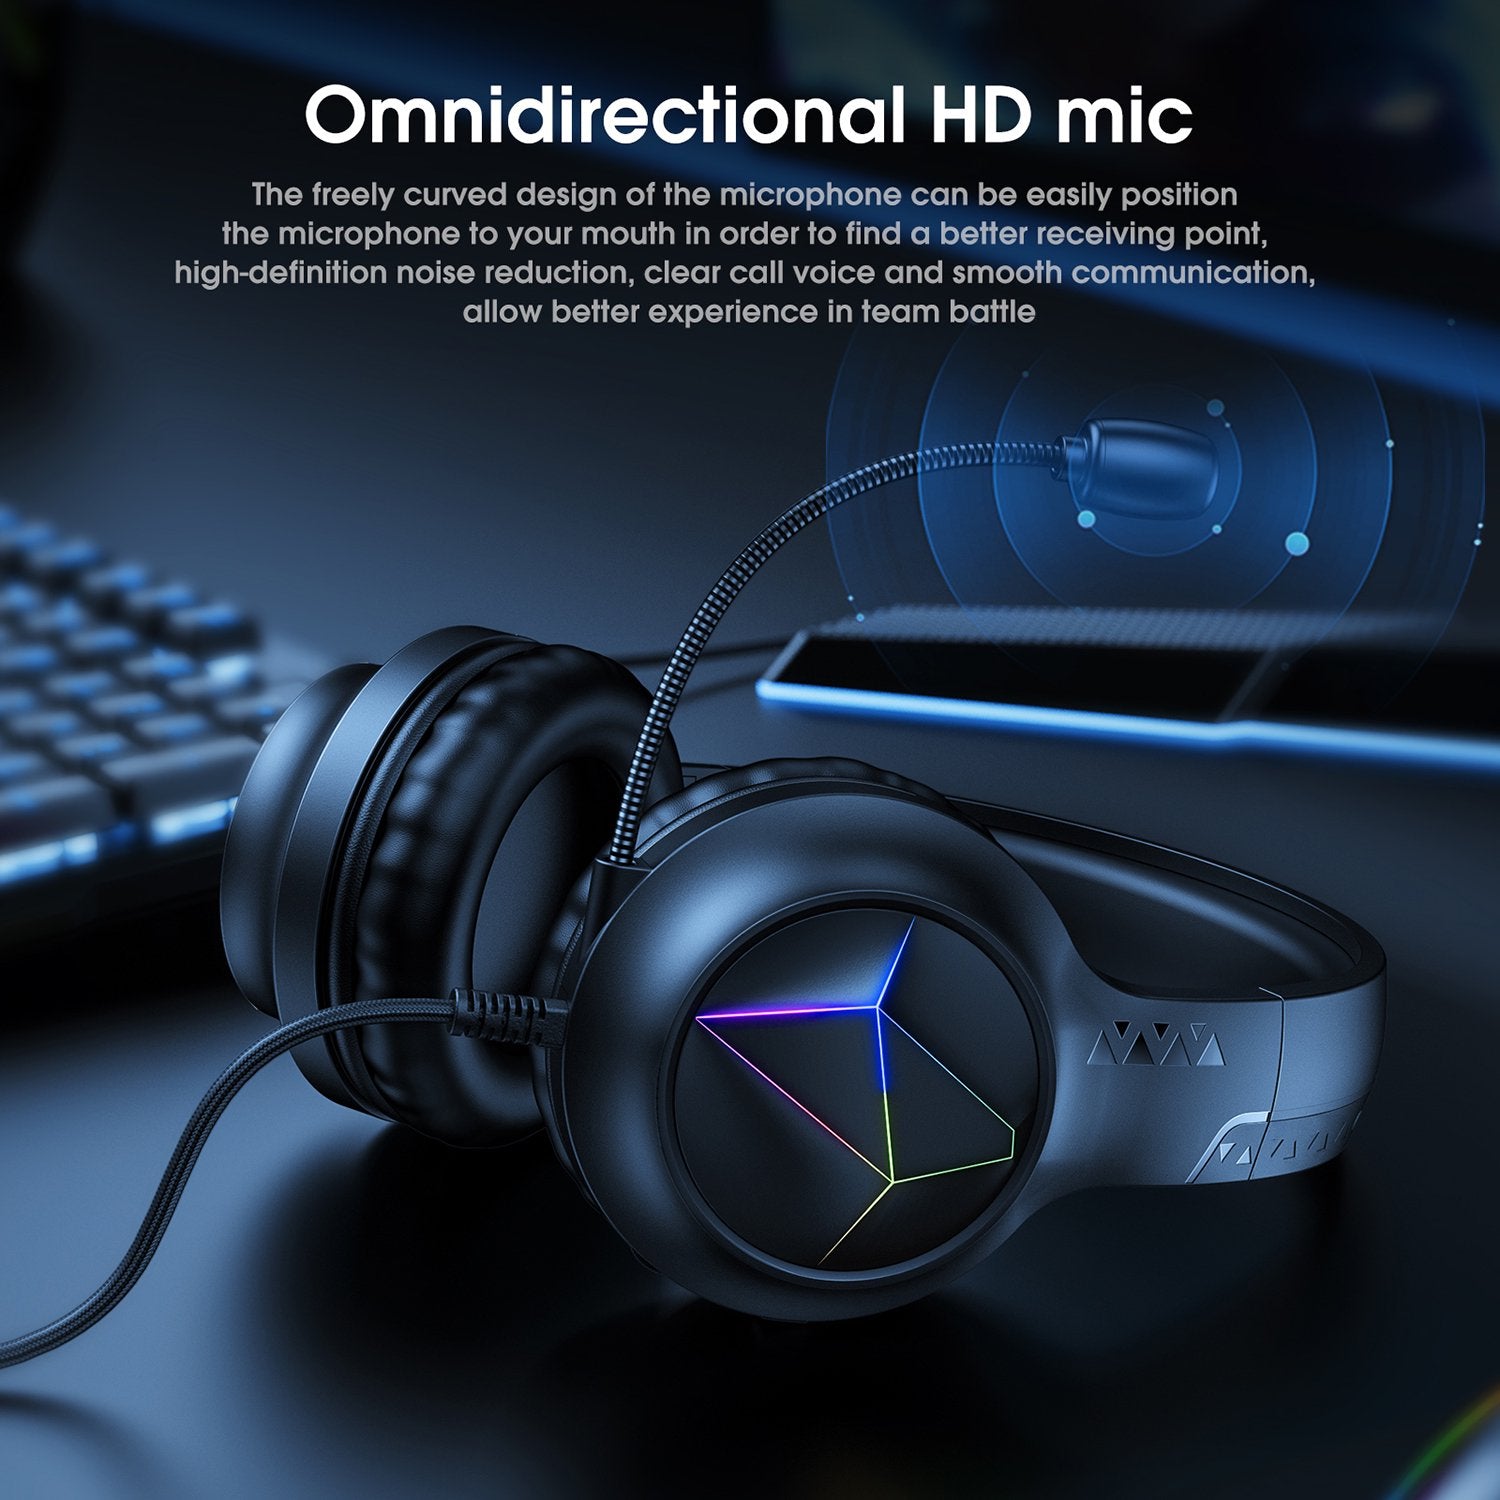 ONIKUMA X35 Gaming Headset, Stereo Bass Surround RGB Noise Cancelling Over Ear Headphones, for PS4 PC Nintendo Switch Tablet, Noise Cancelling Mic LED Light, Designed Technically for Gamer